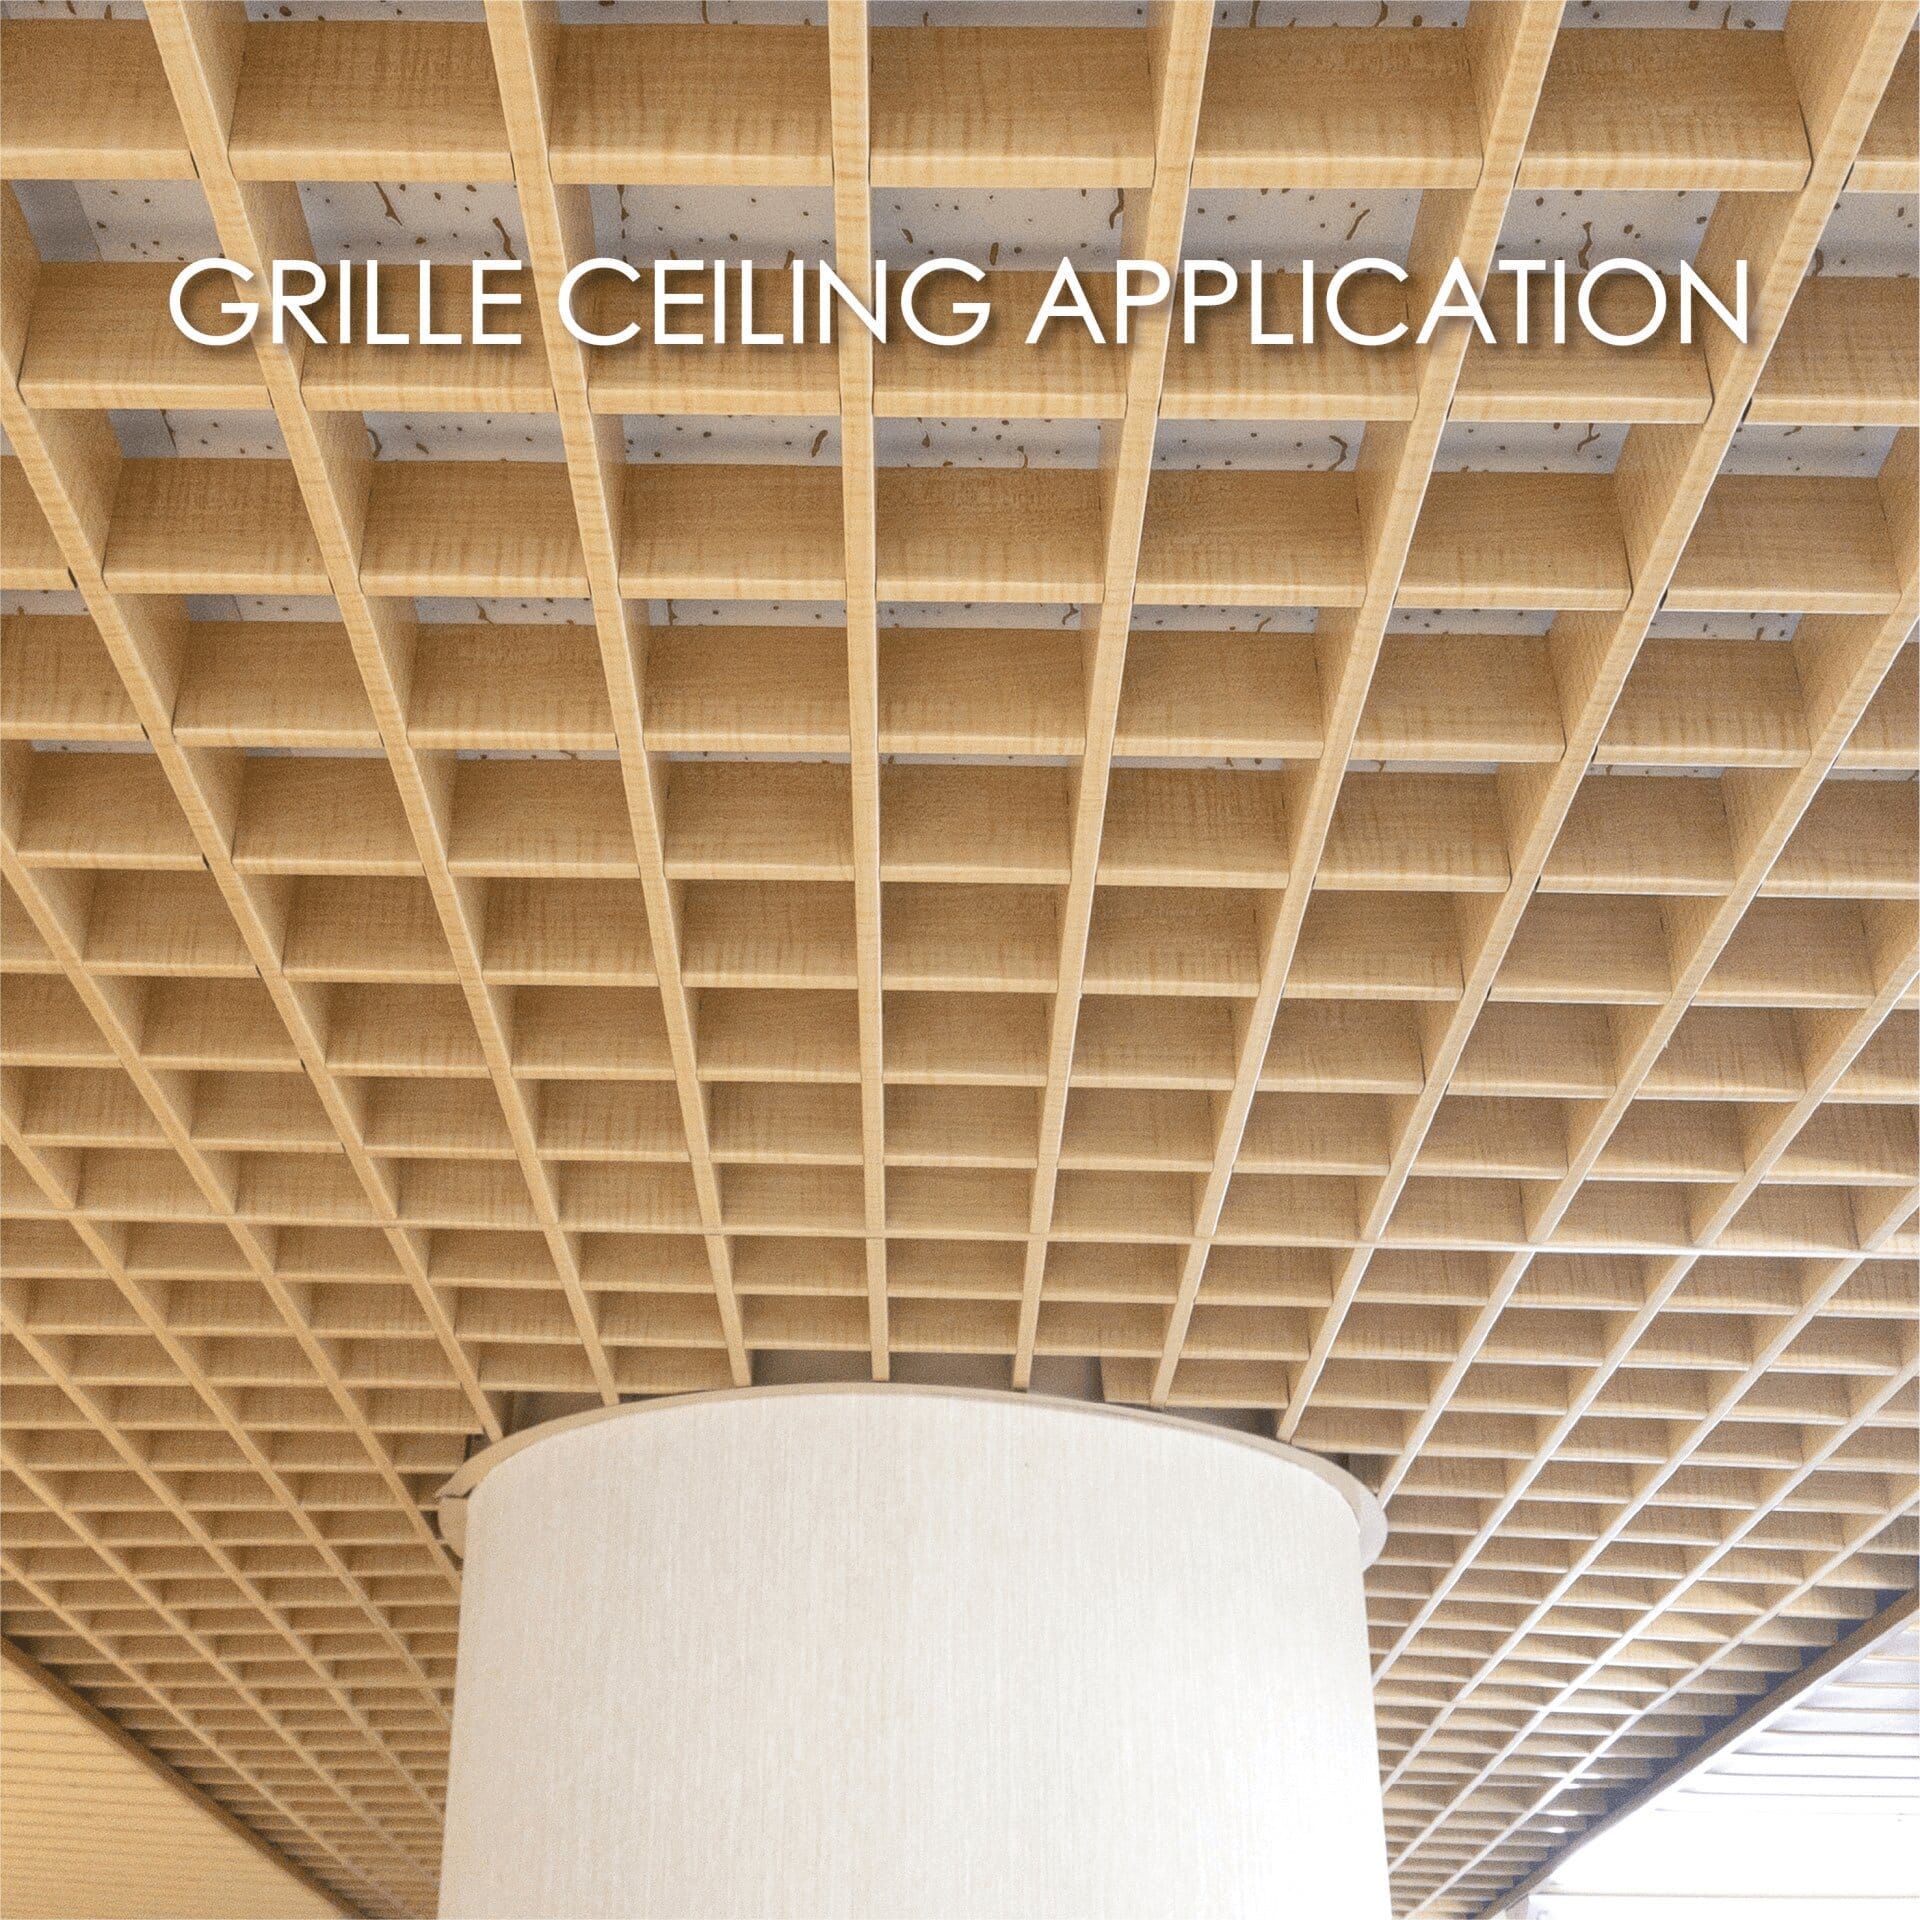 Using laminated metal for grille ceilings adds decorativeity and durability